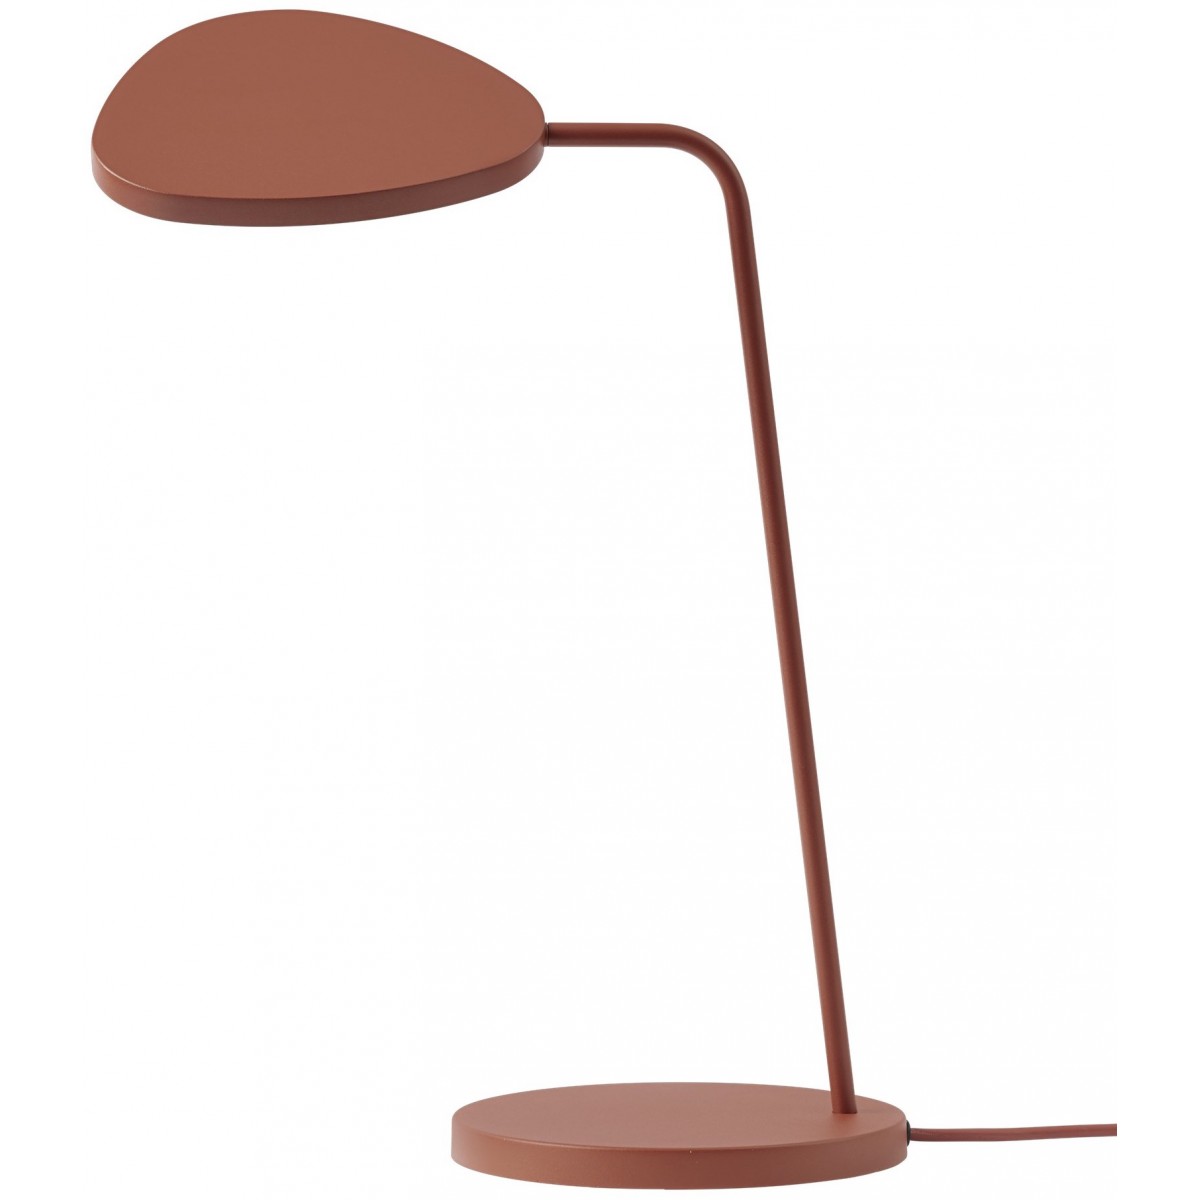 Leaf table lamp - copper brown*